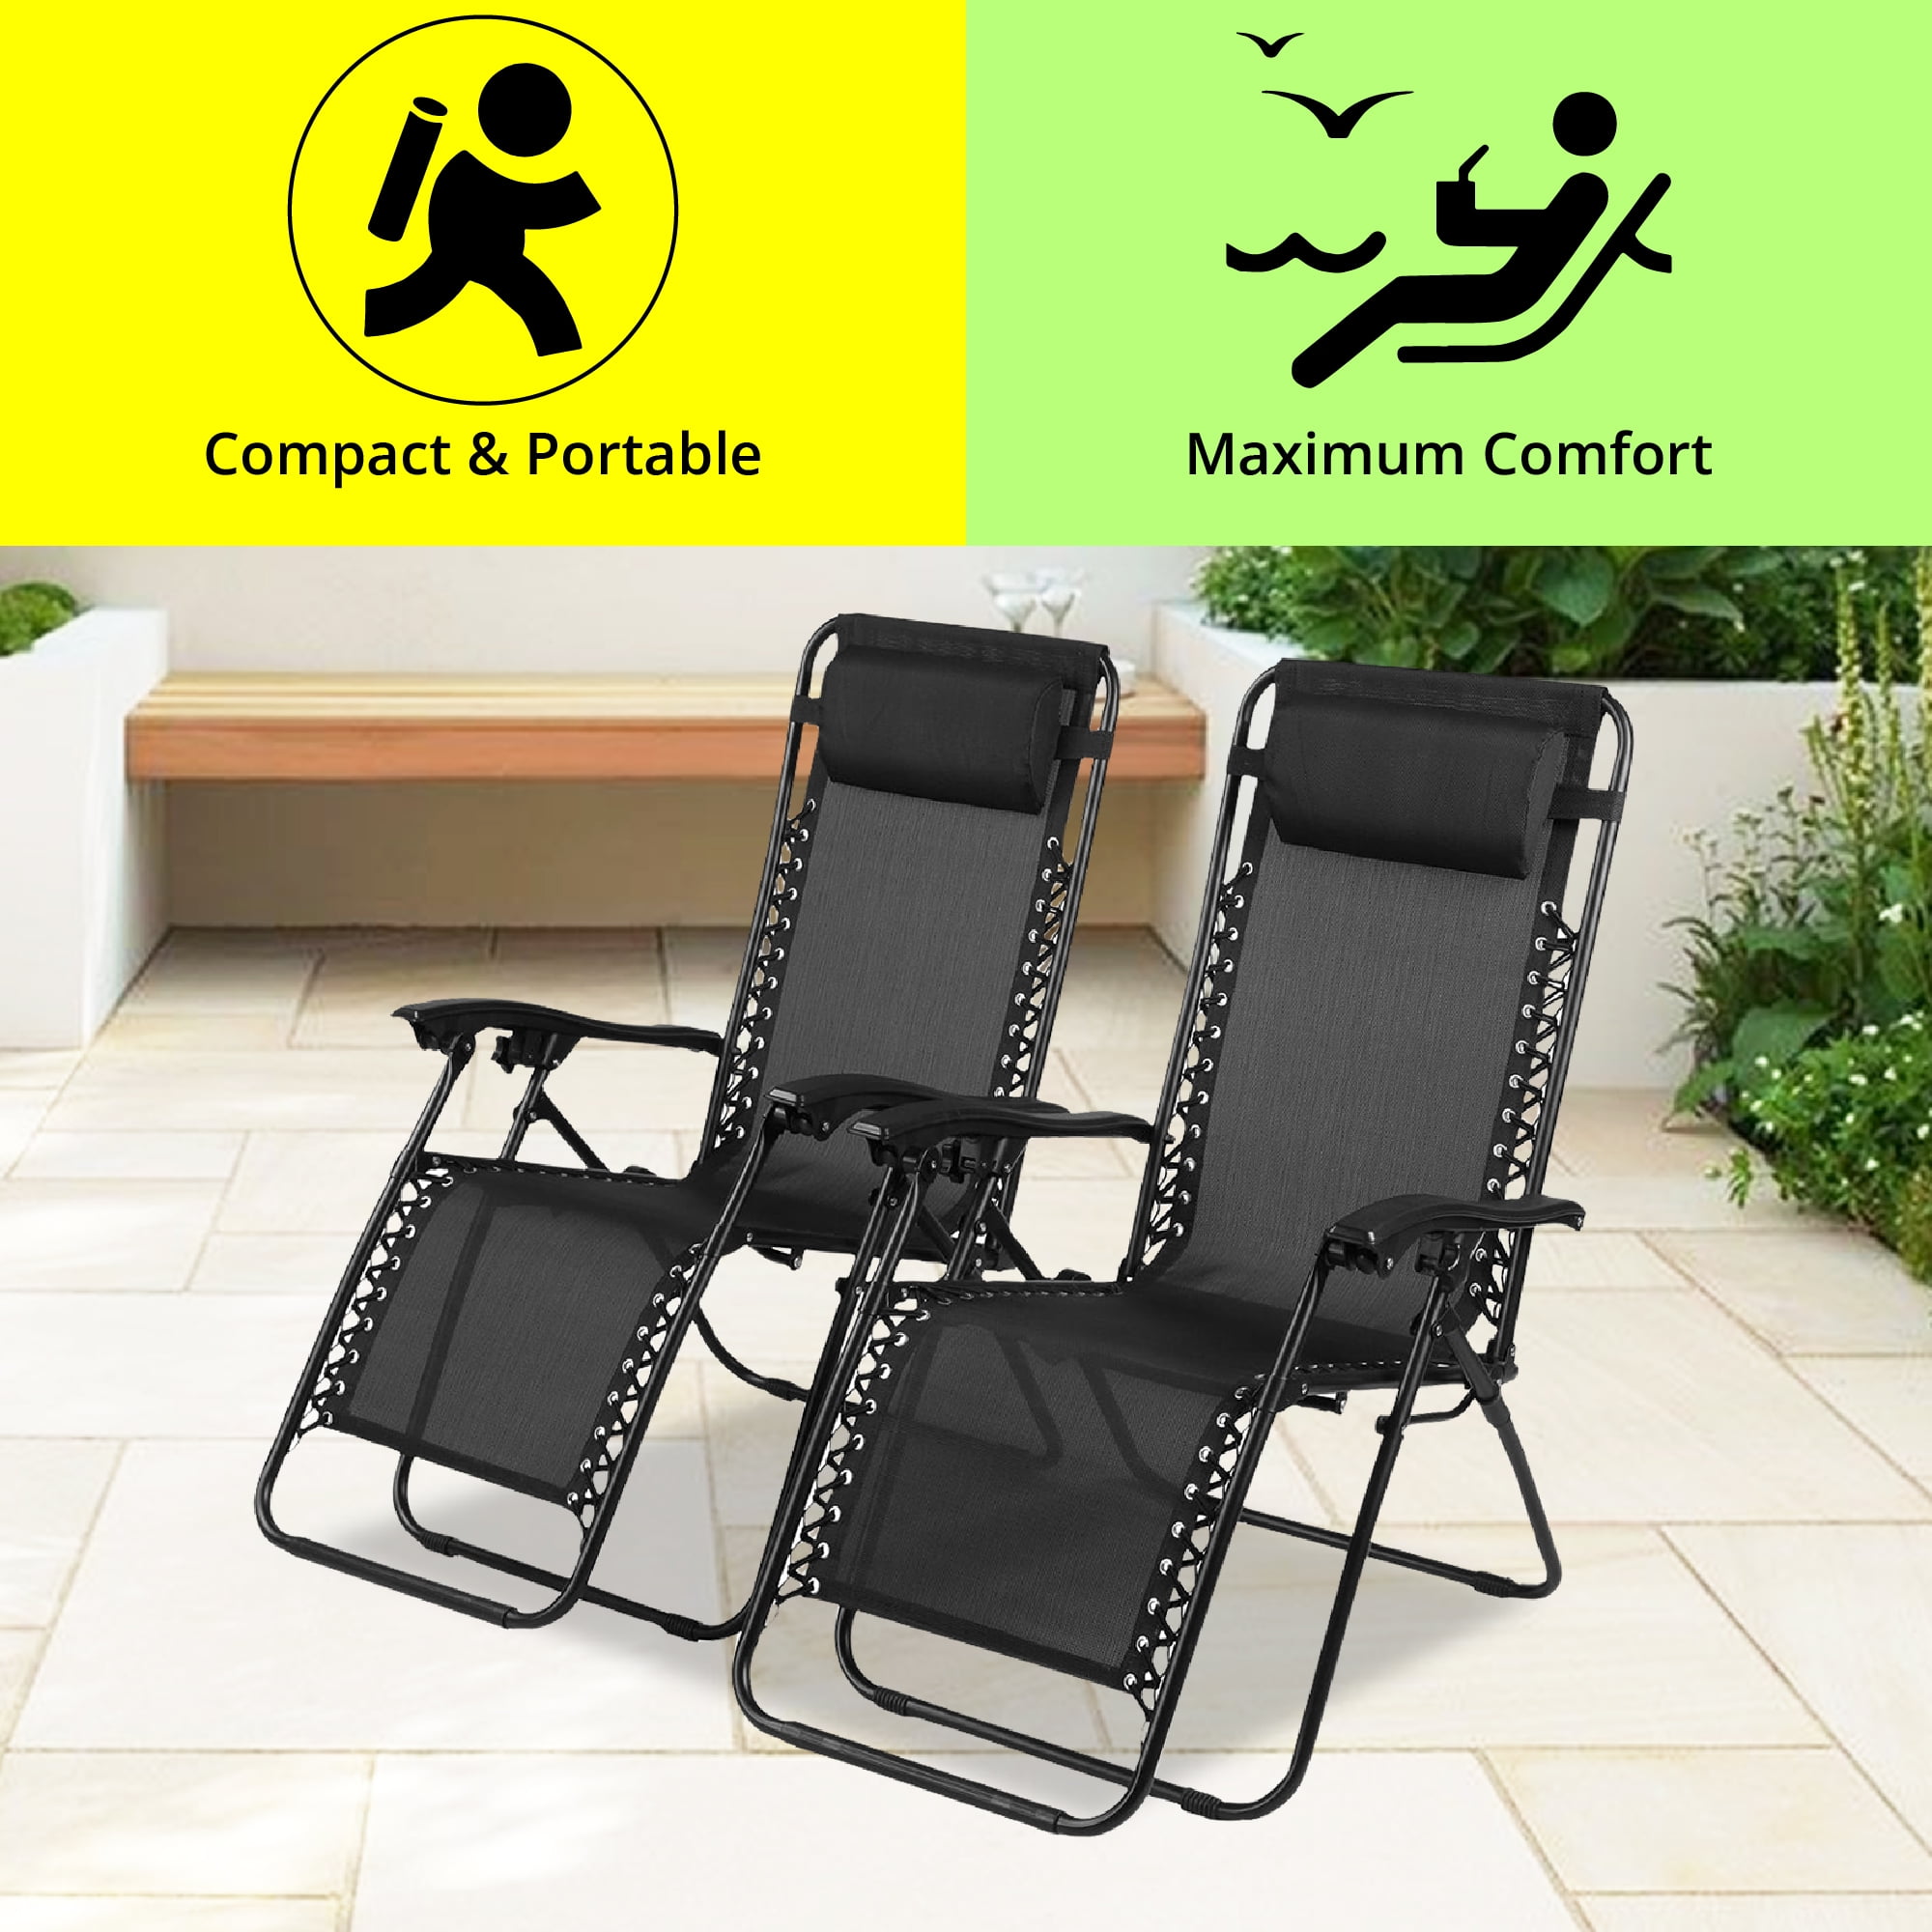 Set Of 2 Adjustable Zero Gravity Lounge Comfort Chair Recliners For Patio/Pool 